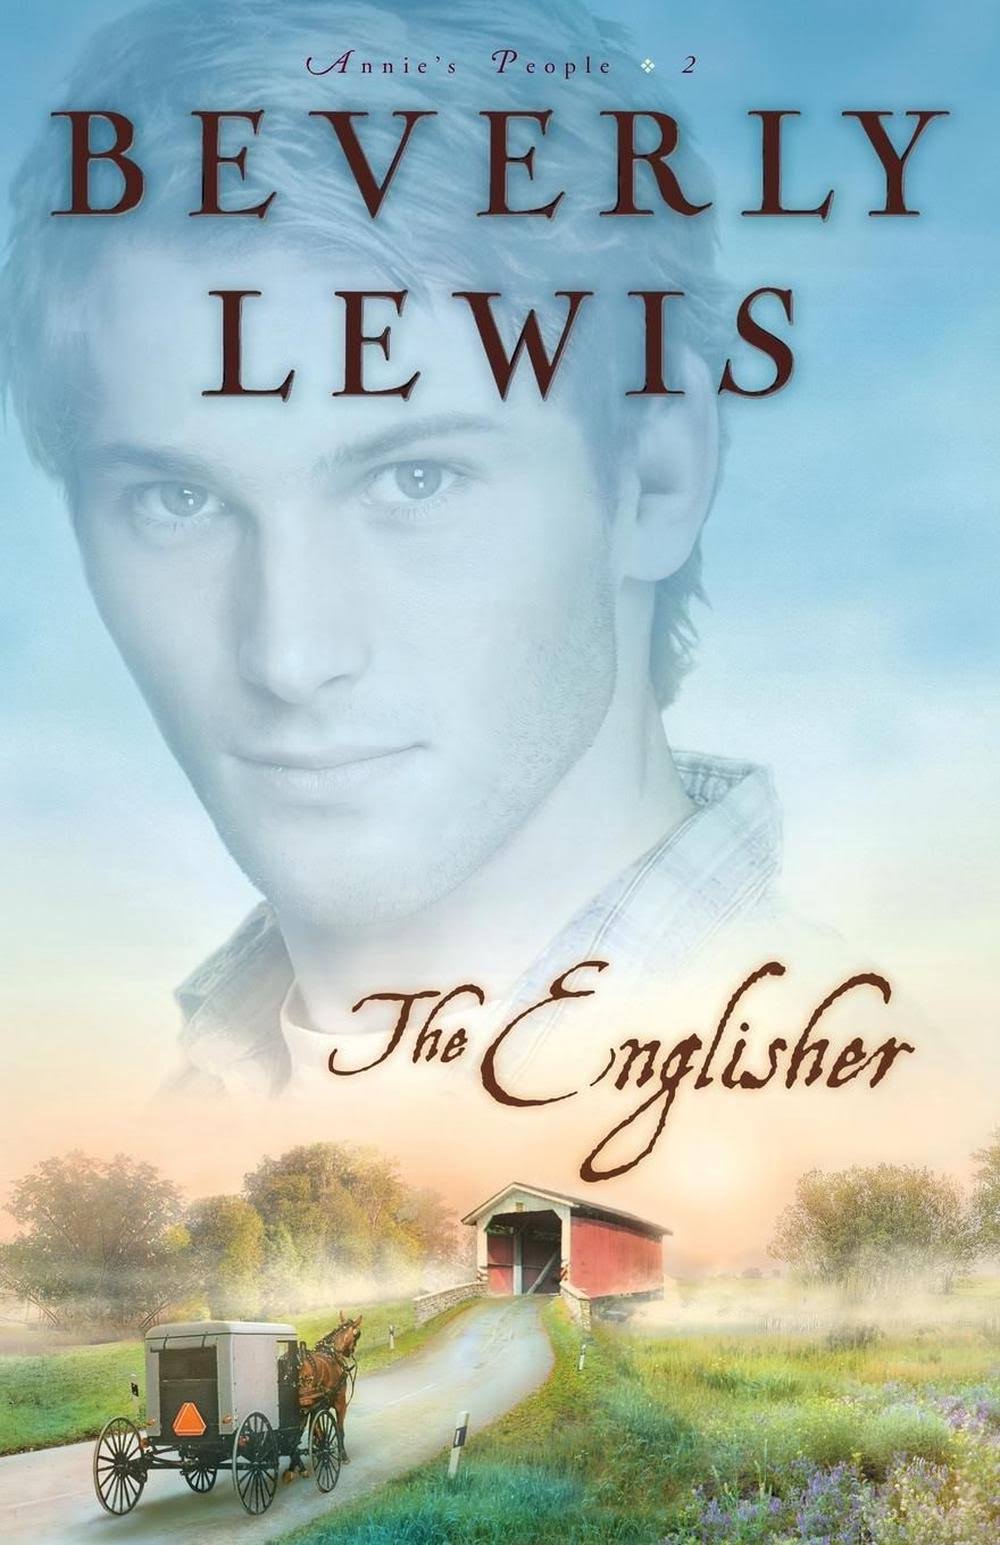 The Englisher: Bk. 2 [Book]